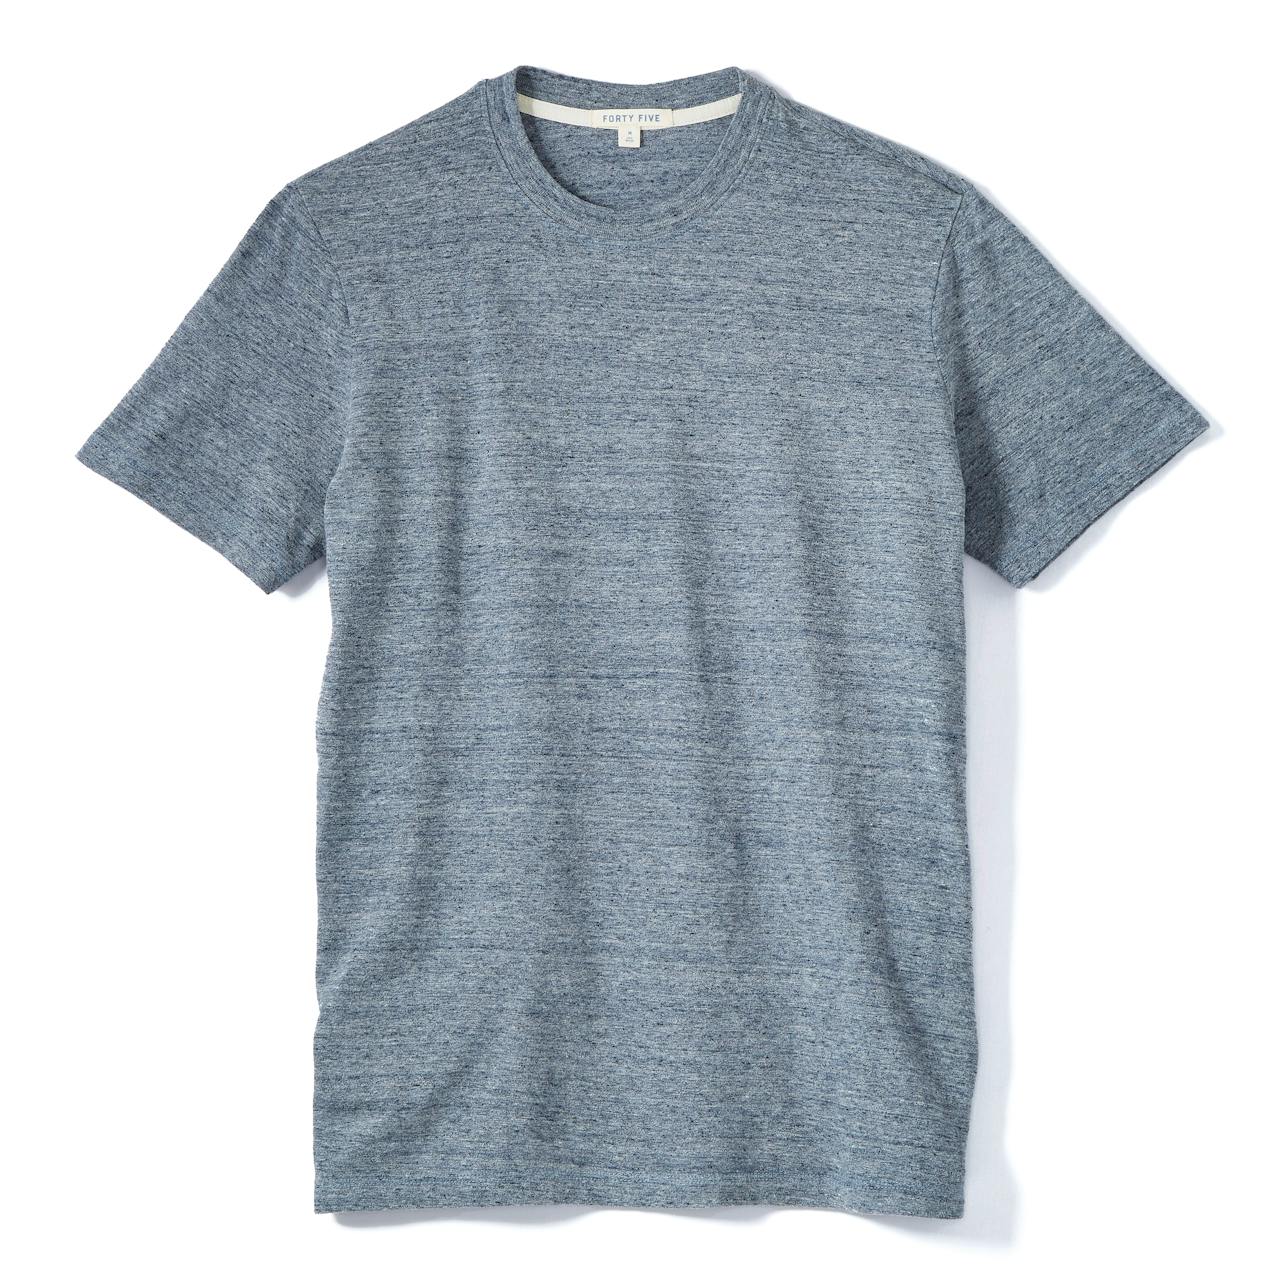 Forty Five Textured Tee